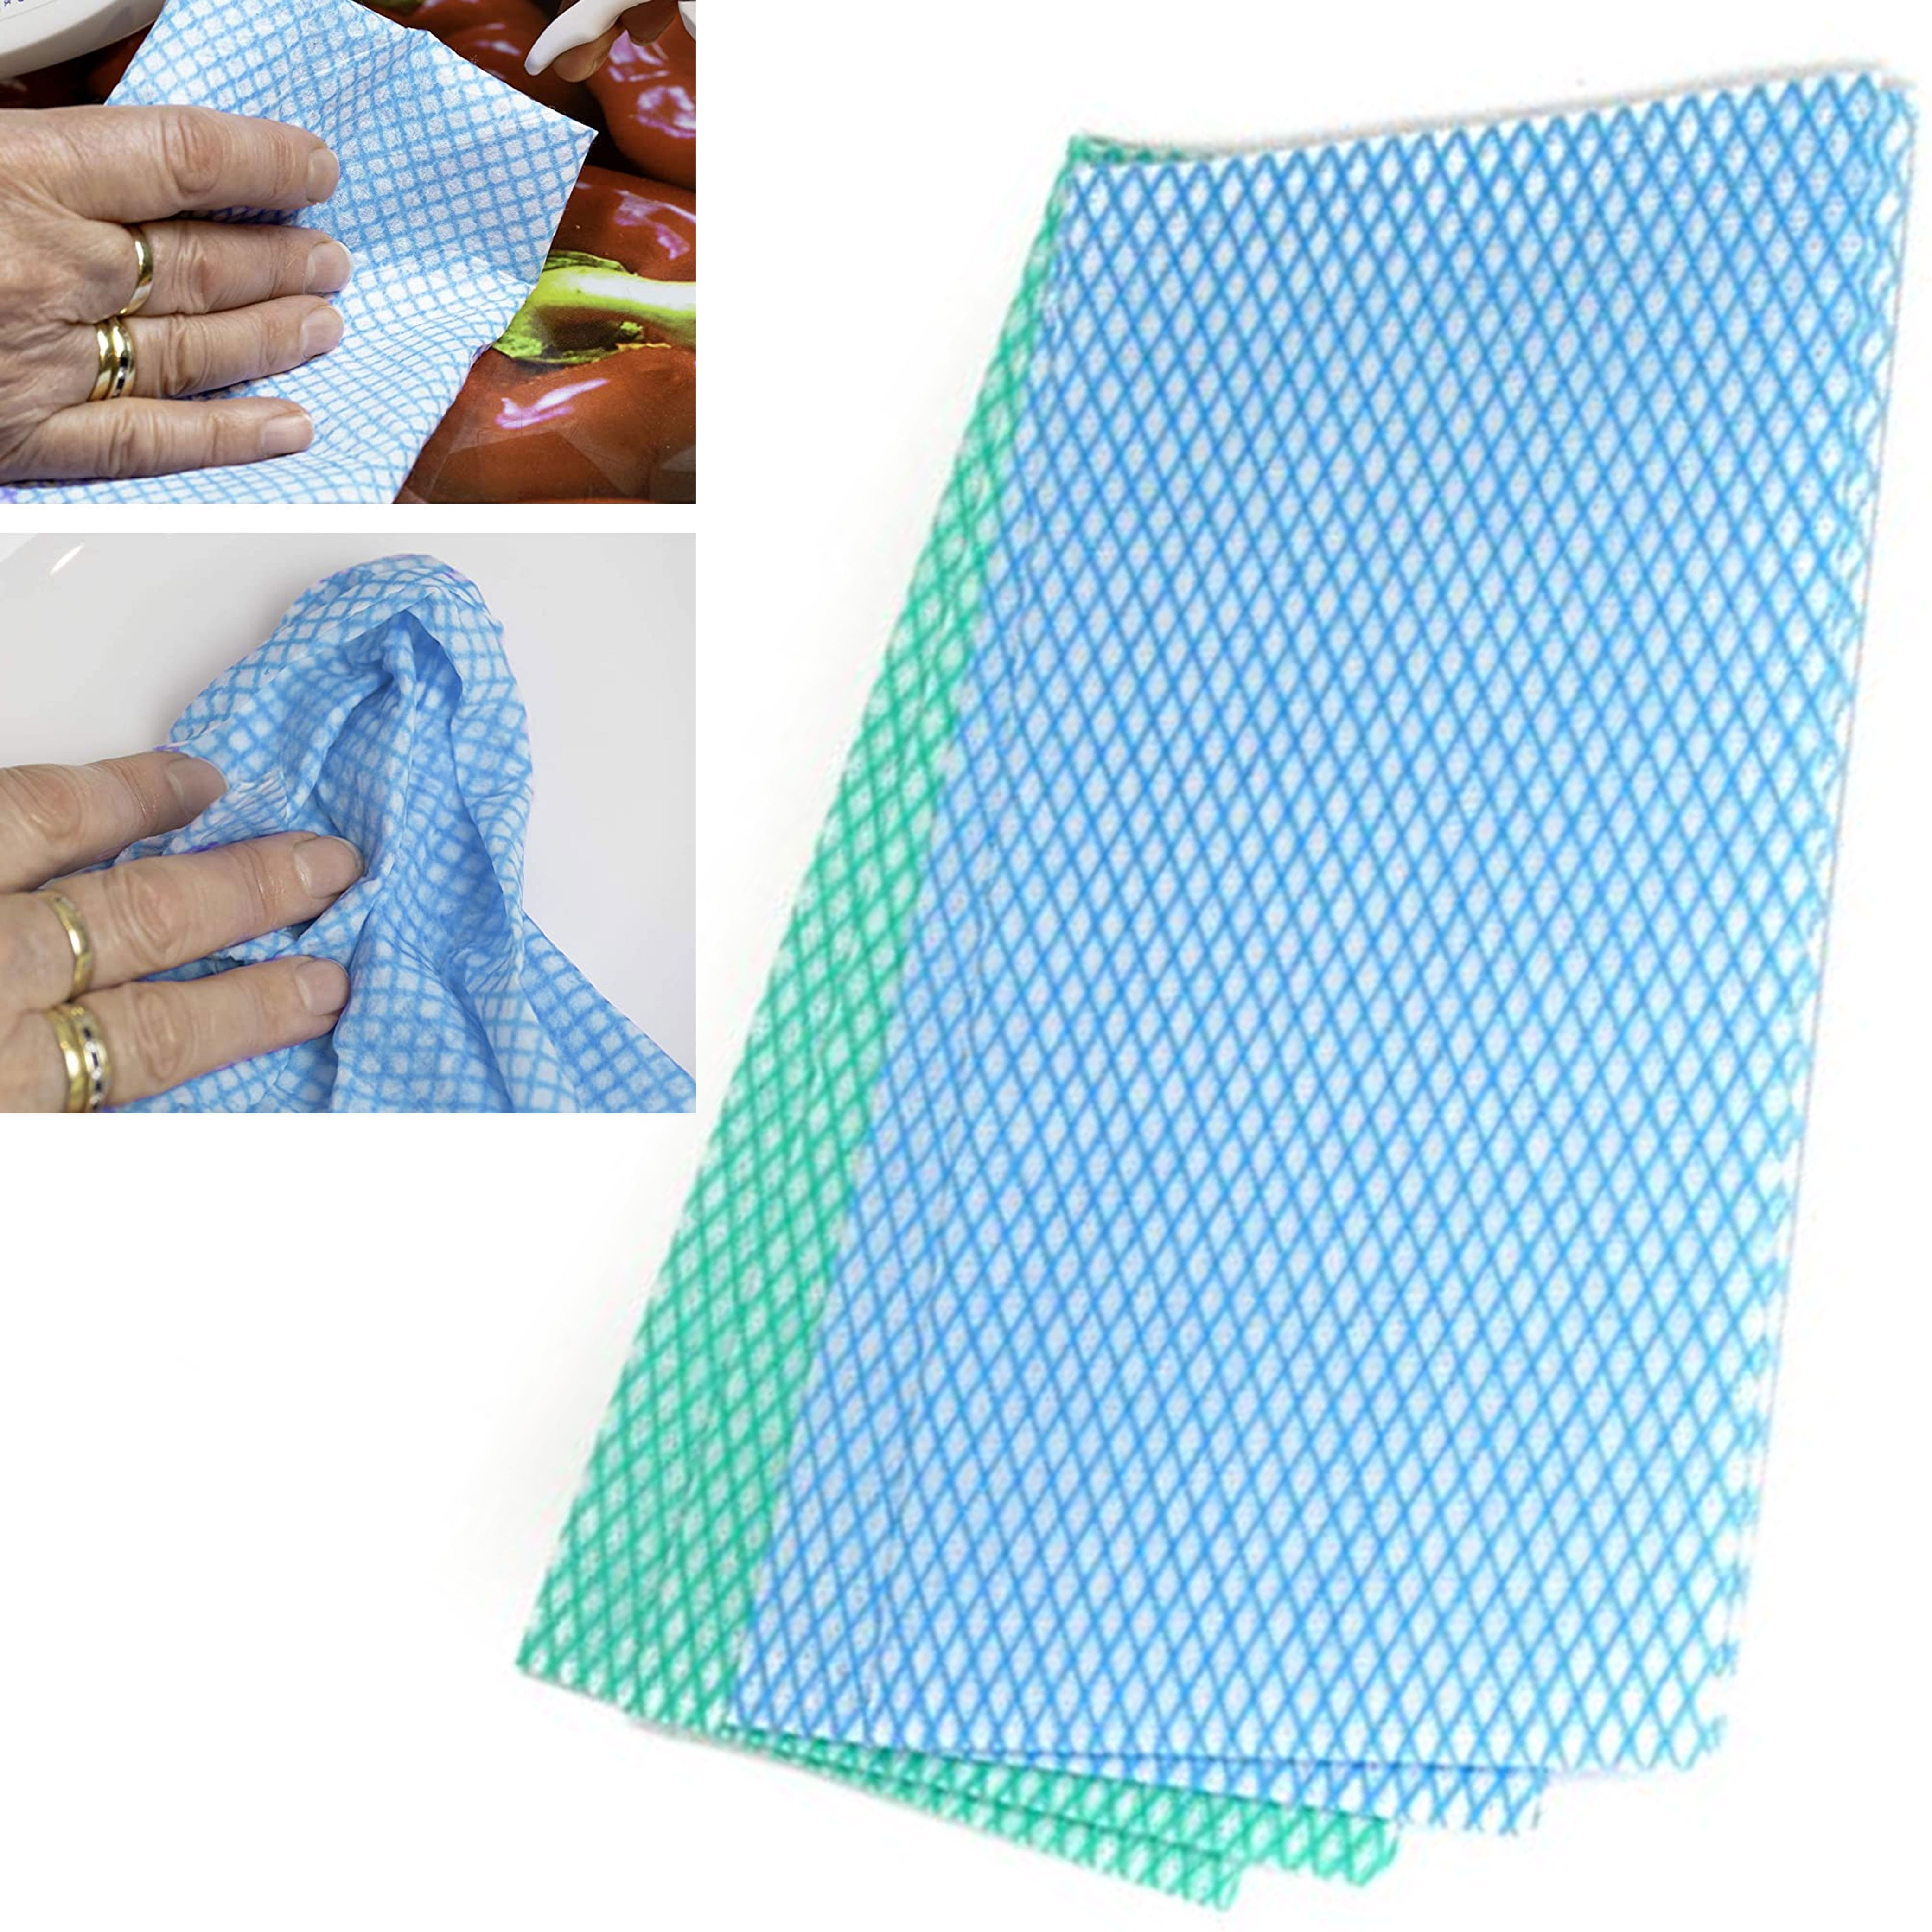 JOYMOOP Microfiber Cleaning Cloth, Kitchen Towels, Dish Rags for Dish  Drying Washing, Absorbent Streak Free Lint Free Rags for Cleaning, Reusable  and Washable Dish Towels-18 Pack,10x10